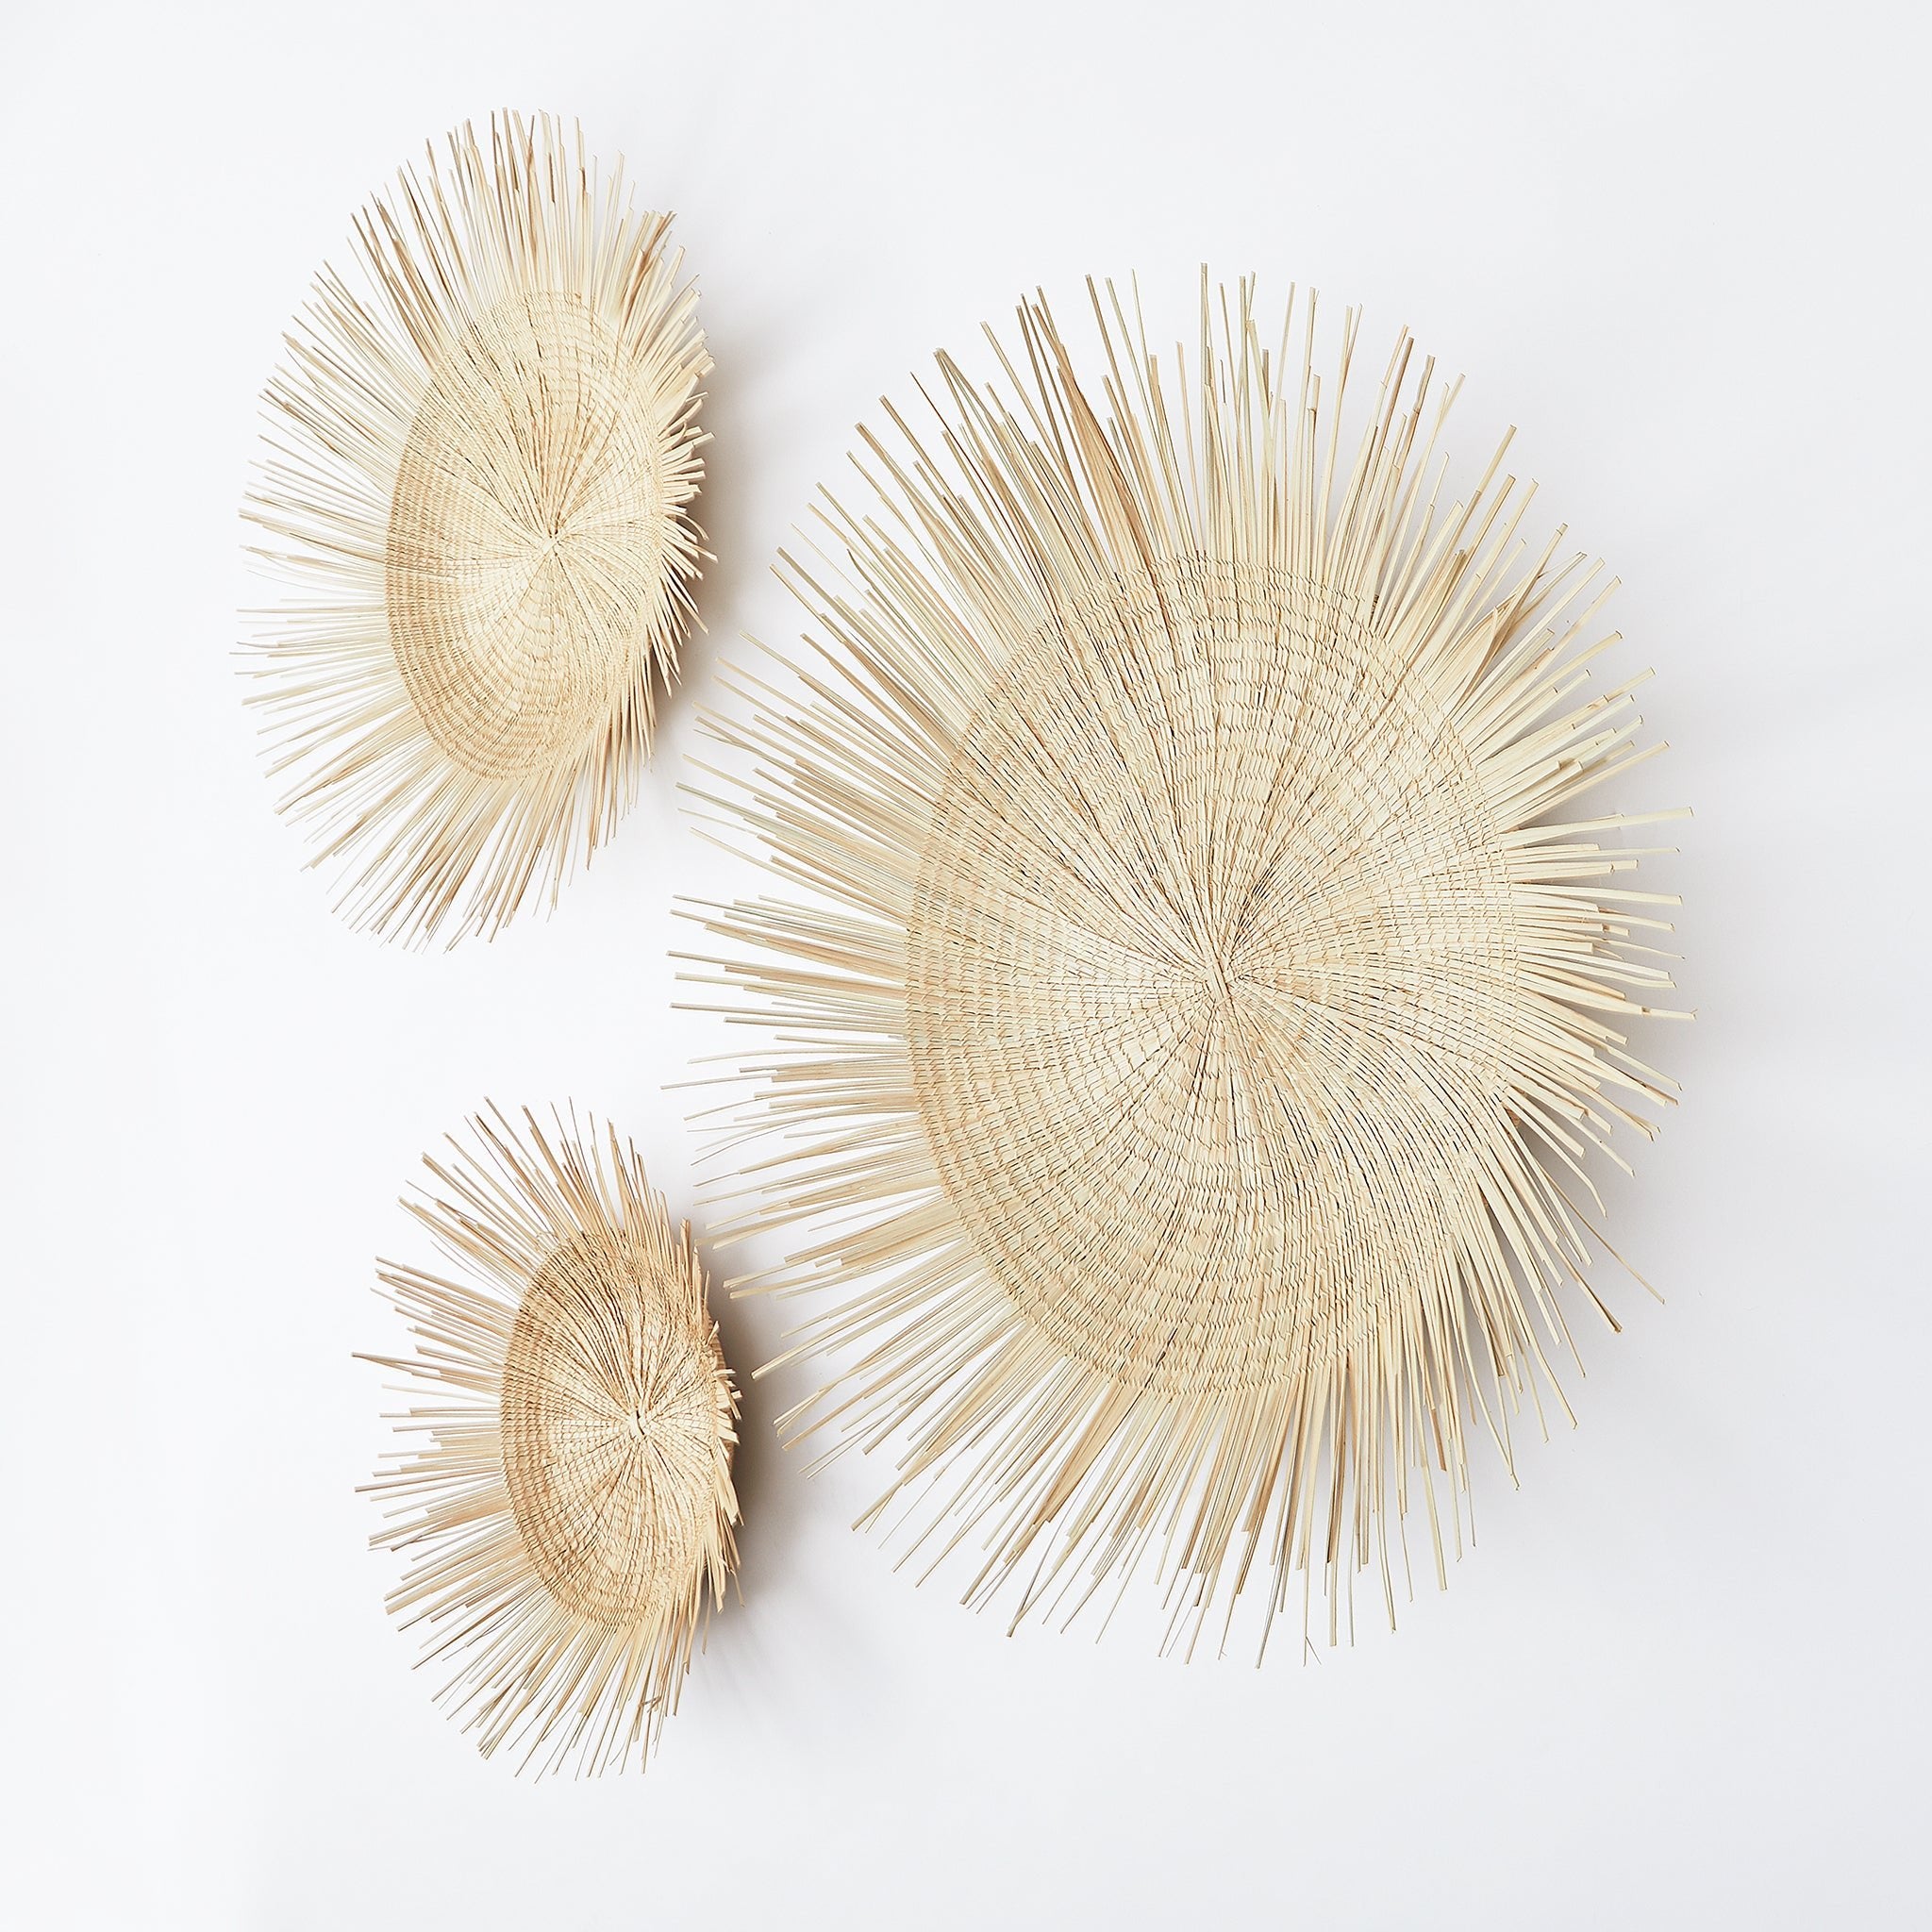 Wall decoration in three sizes: BY NATIVE Sun Plate, hand-woven from palm leaves in Malawi